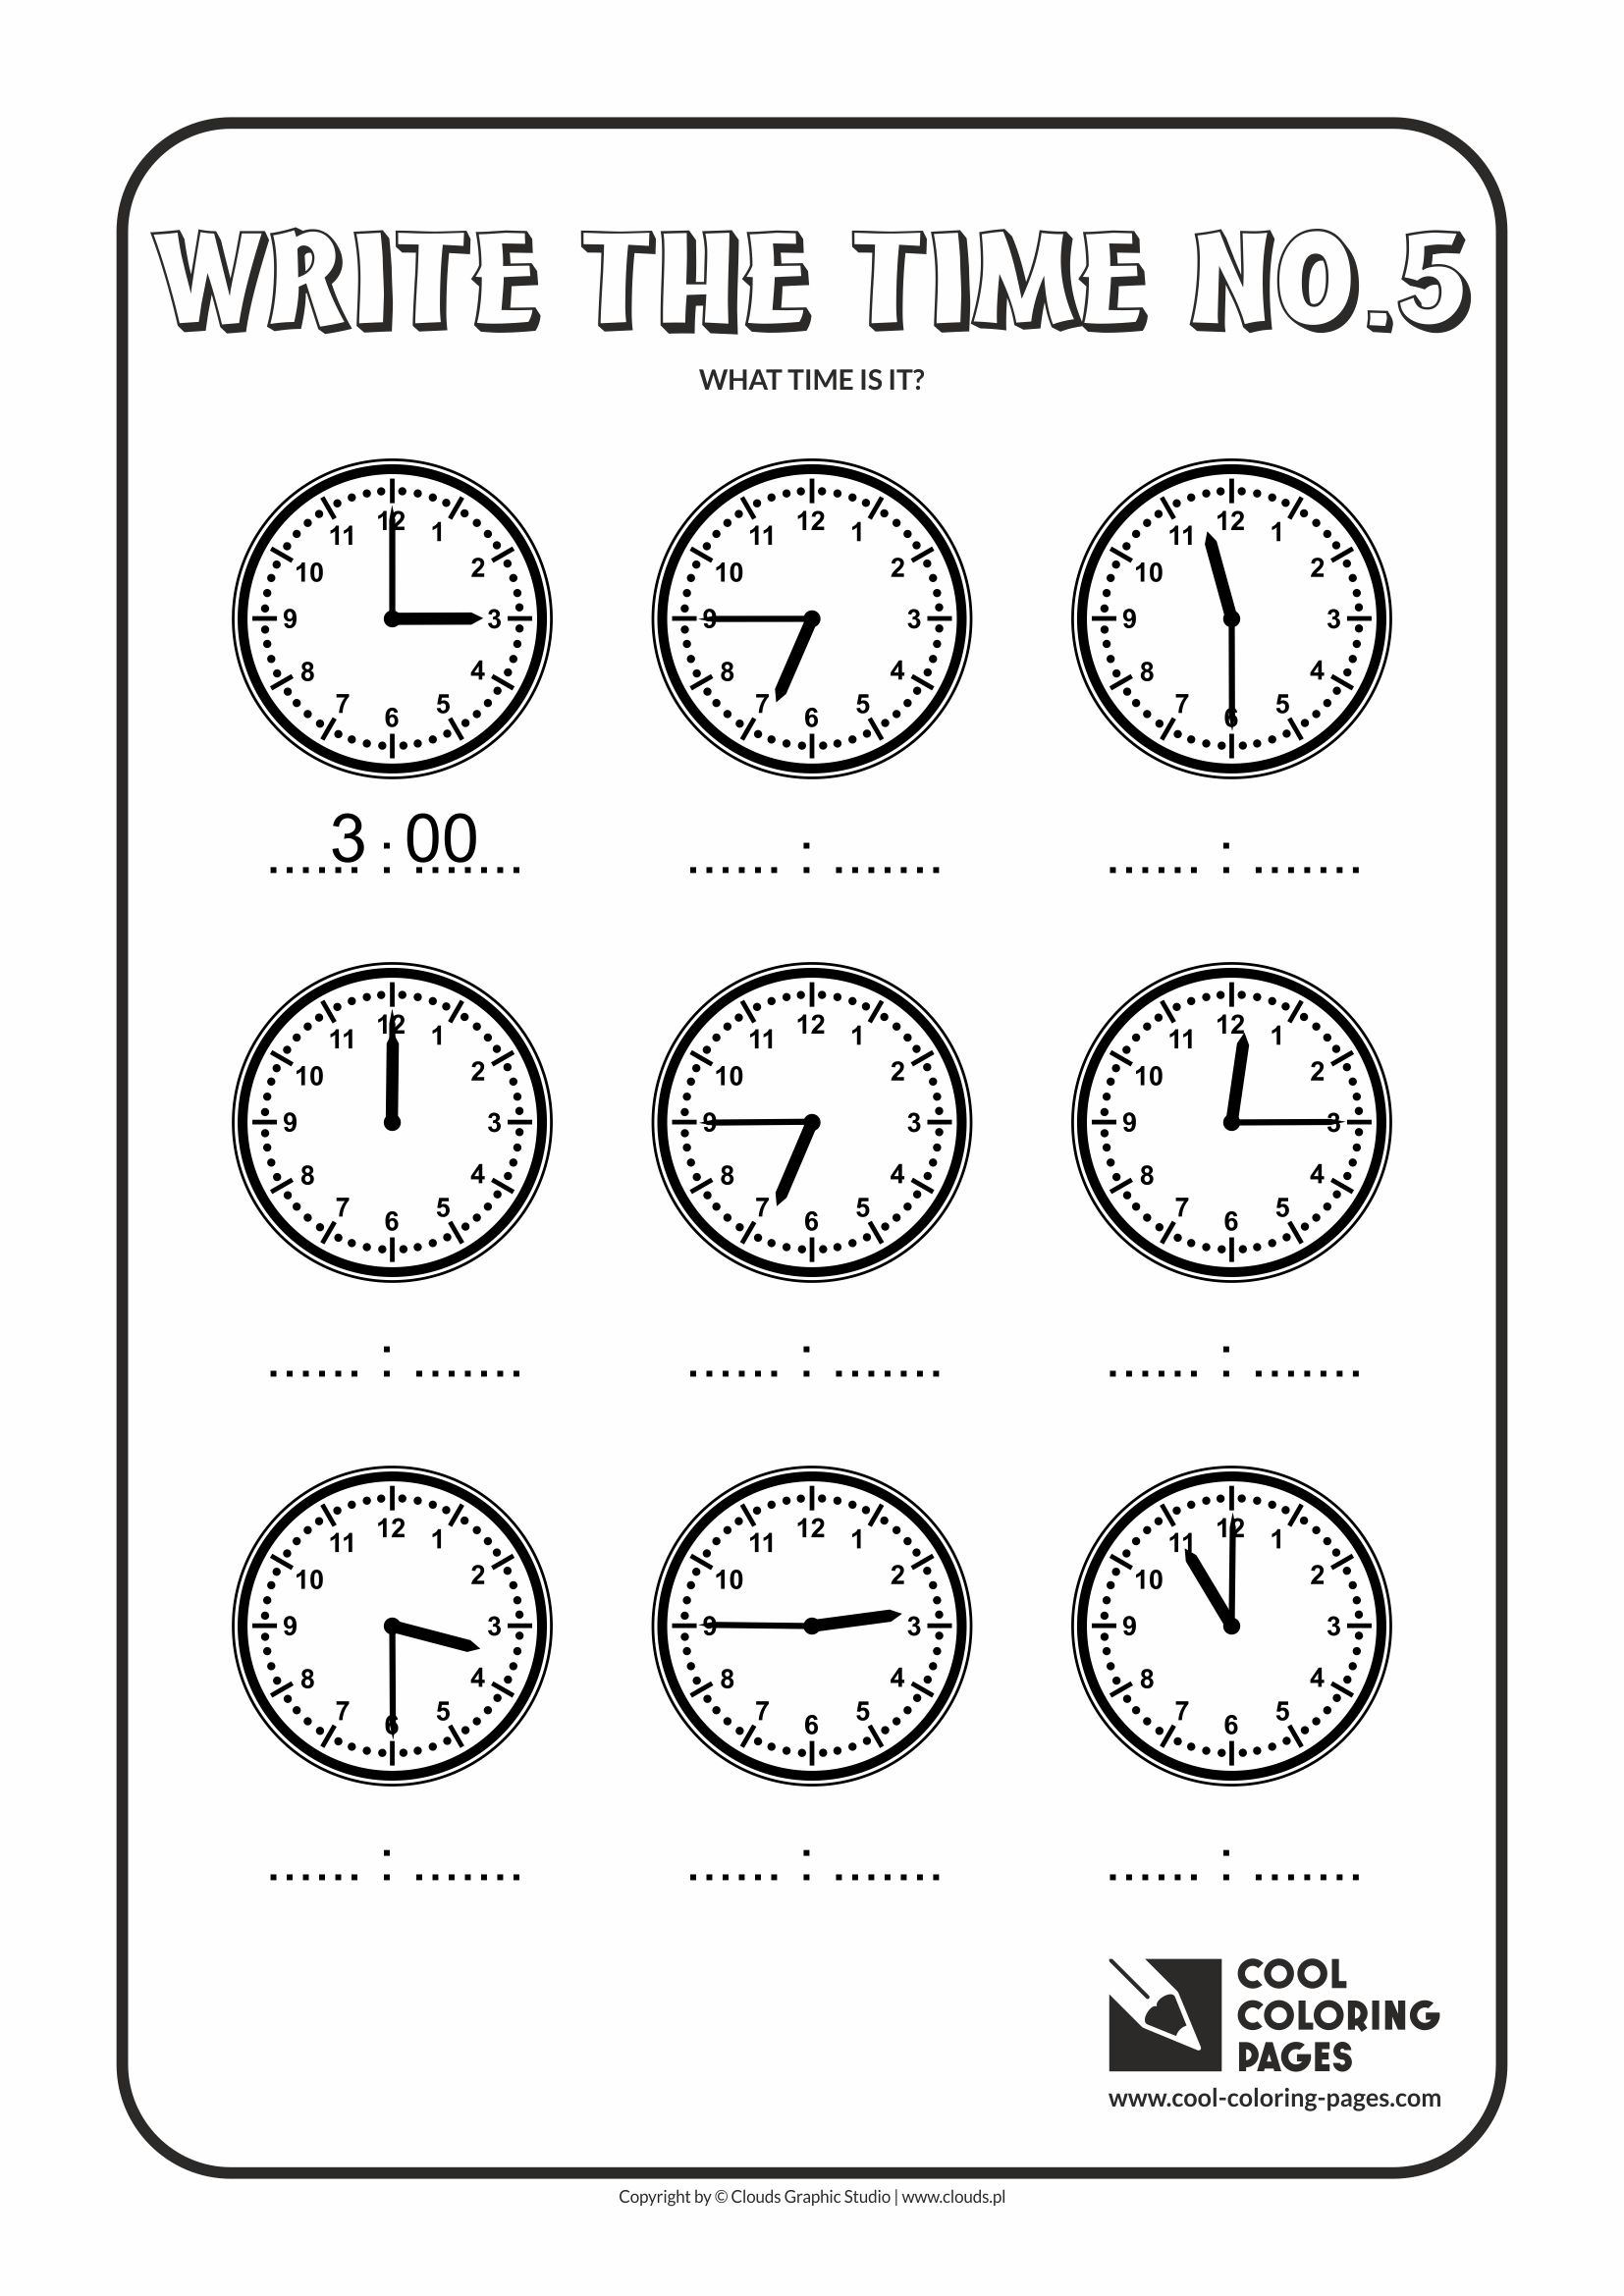 Cool Coloring Pages - Time / Write the time no.5